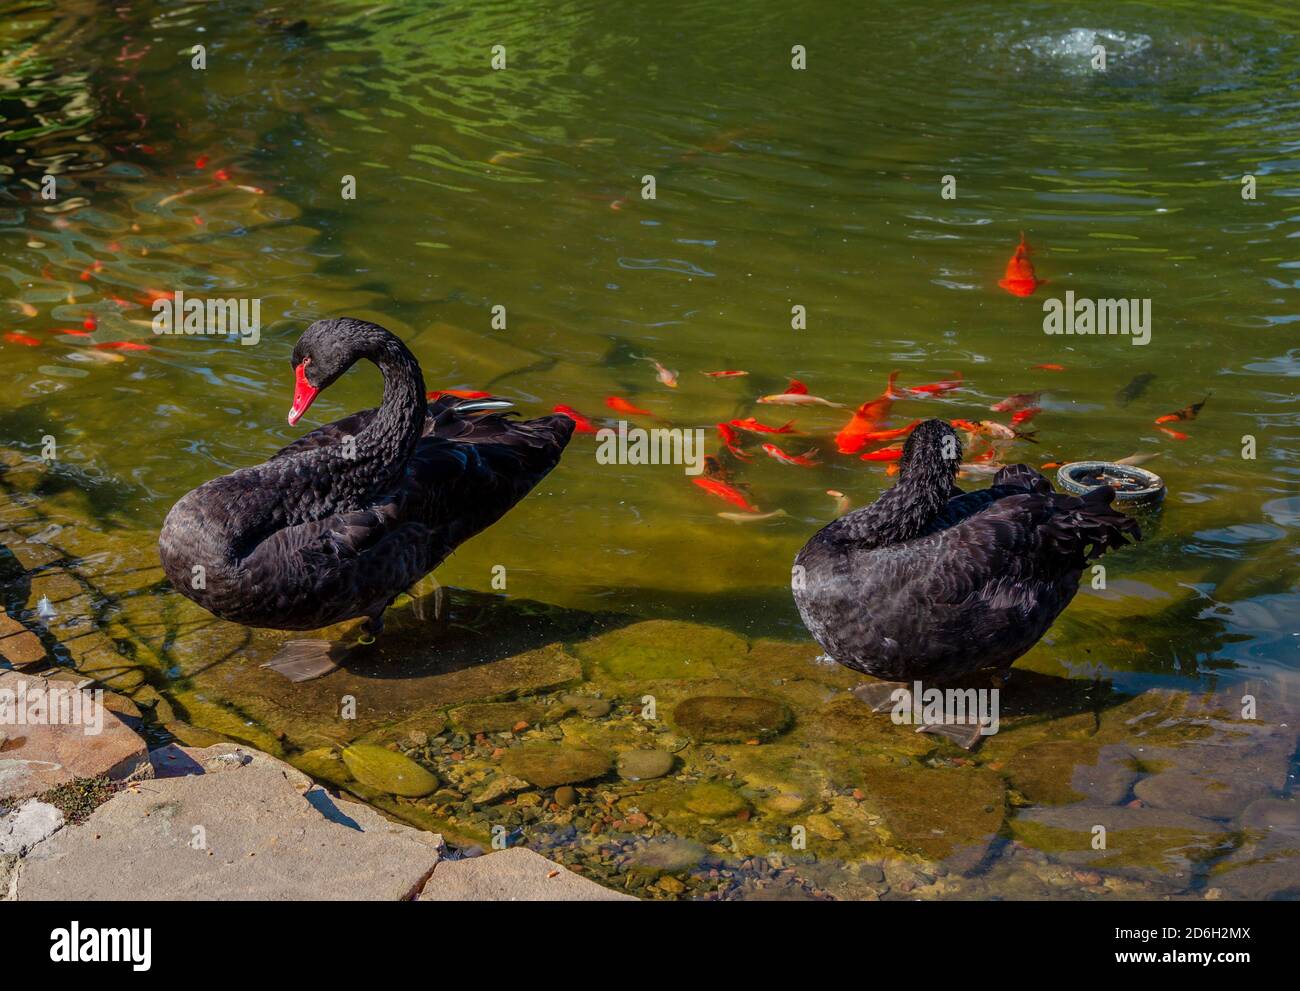 Beautiful black swans on a pond with red carp koi fishes. Stock Photo